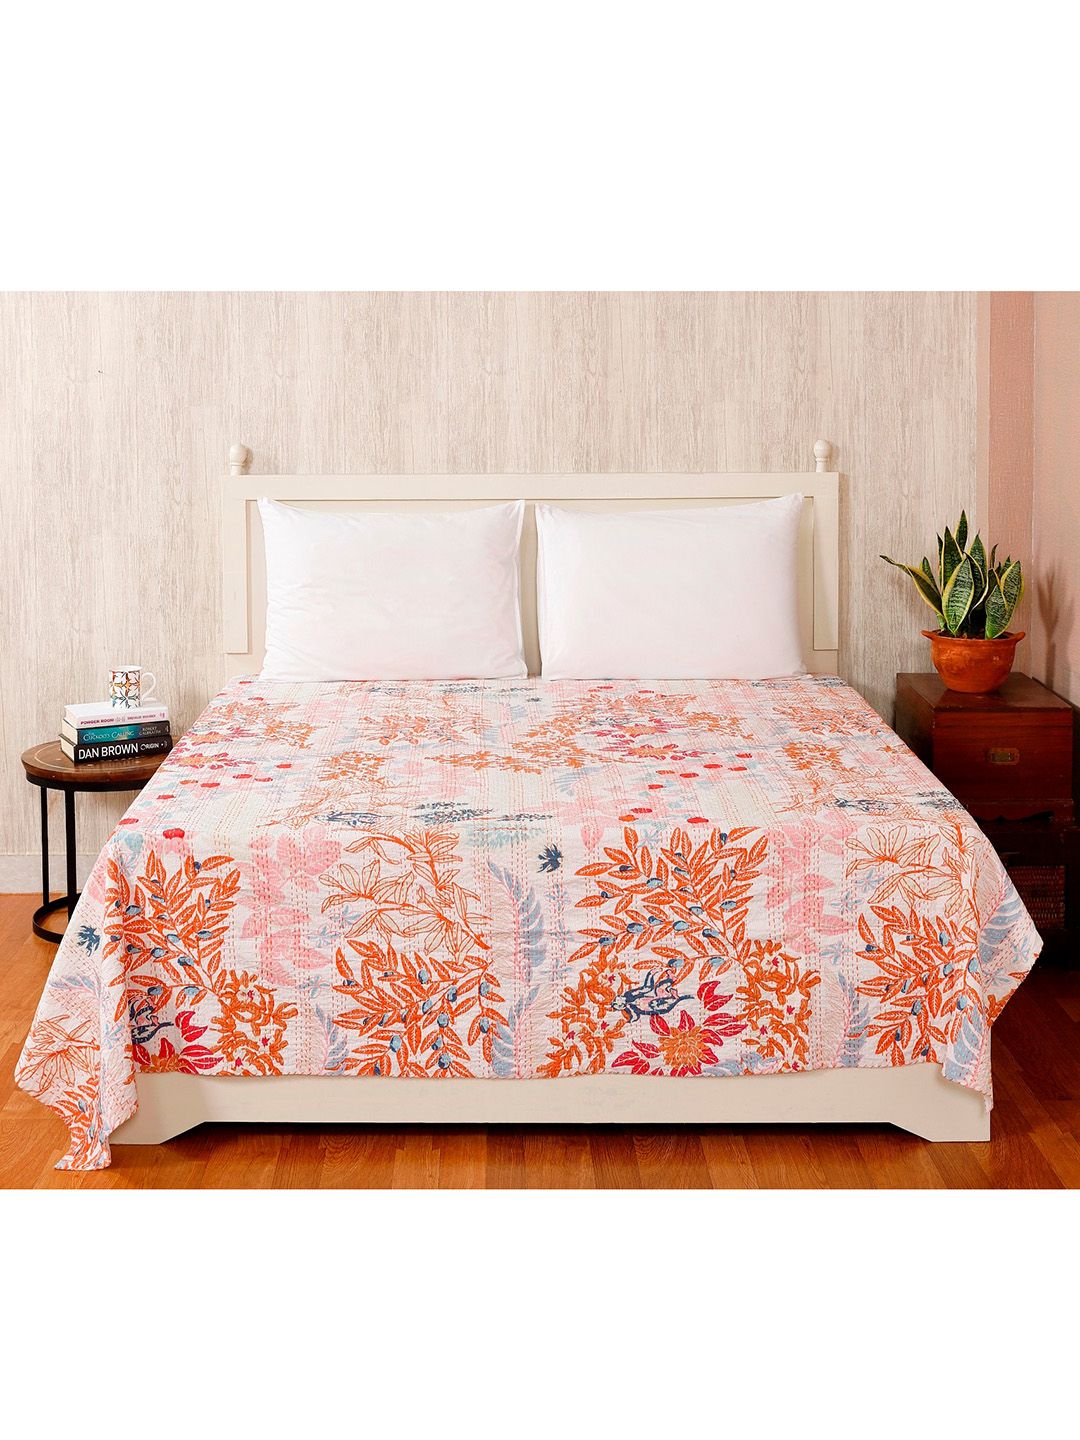 HANDICRAFT PALACE White & Orange-Colored Kantha Embroidered Cotton Double Queen Bed Cover Price in India